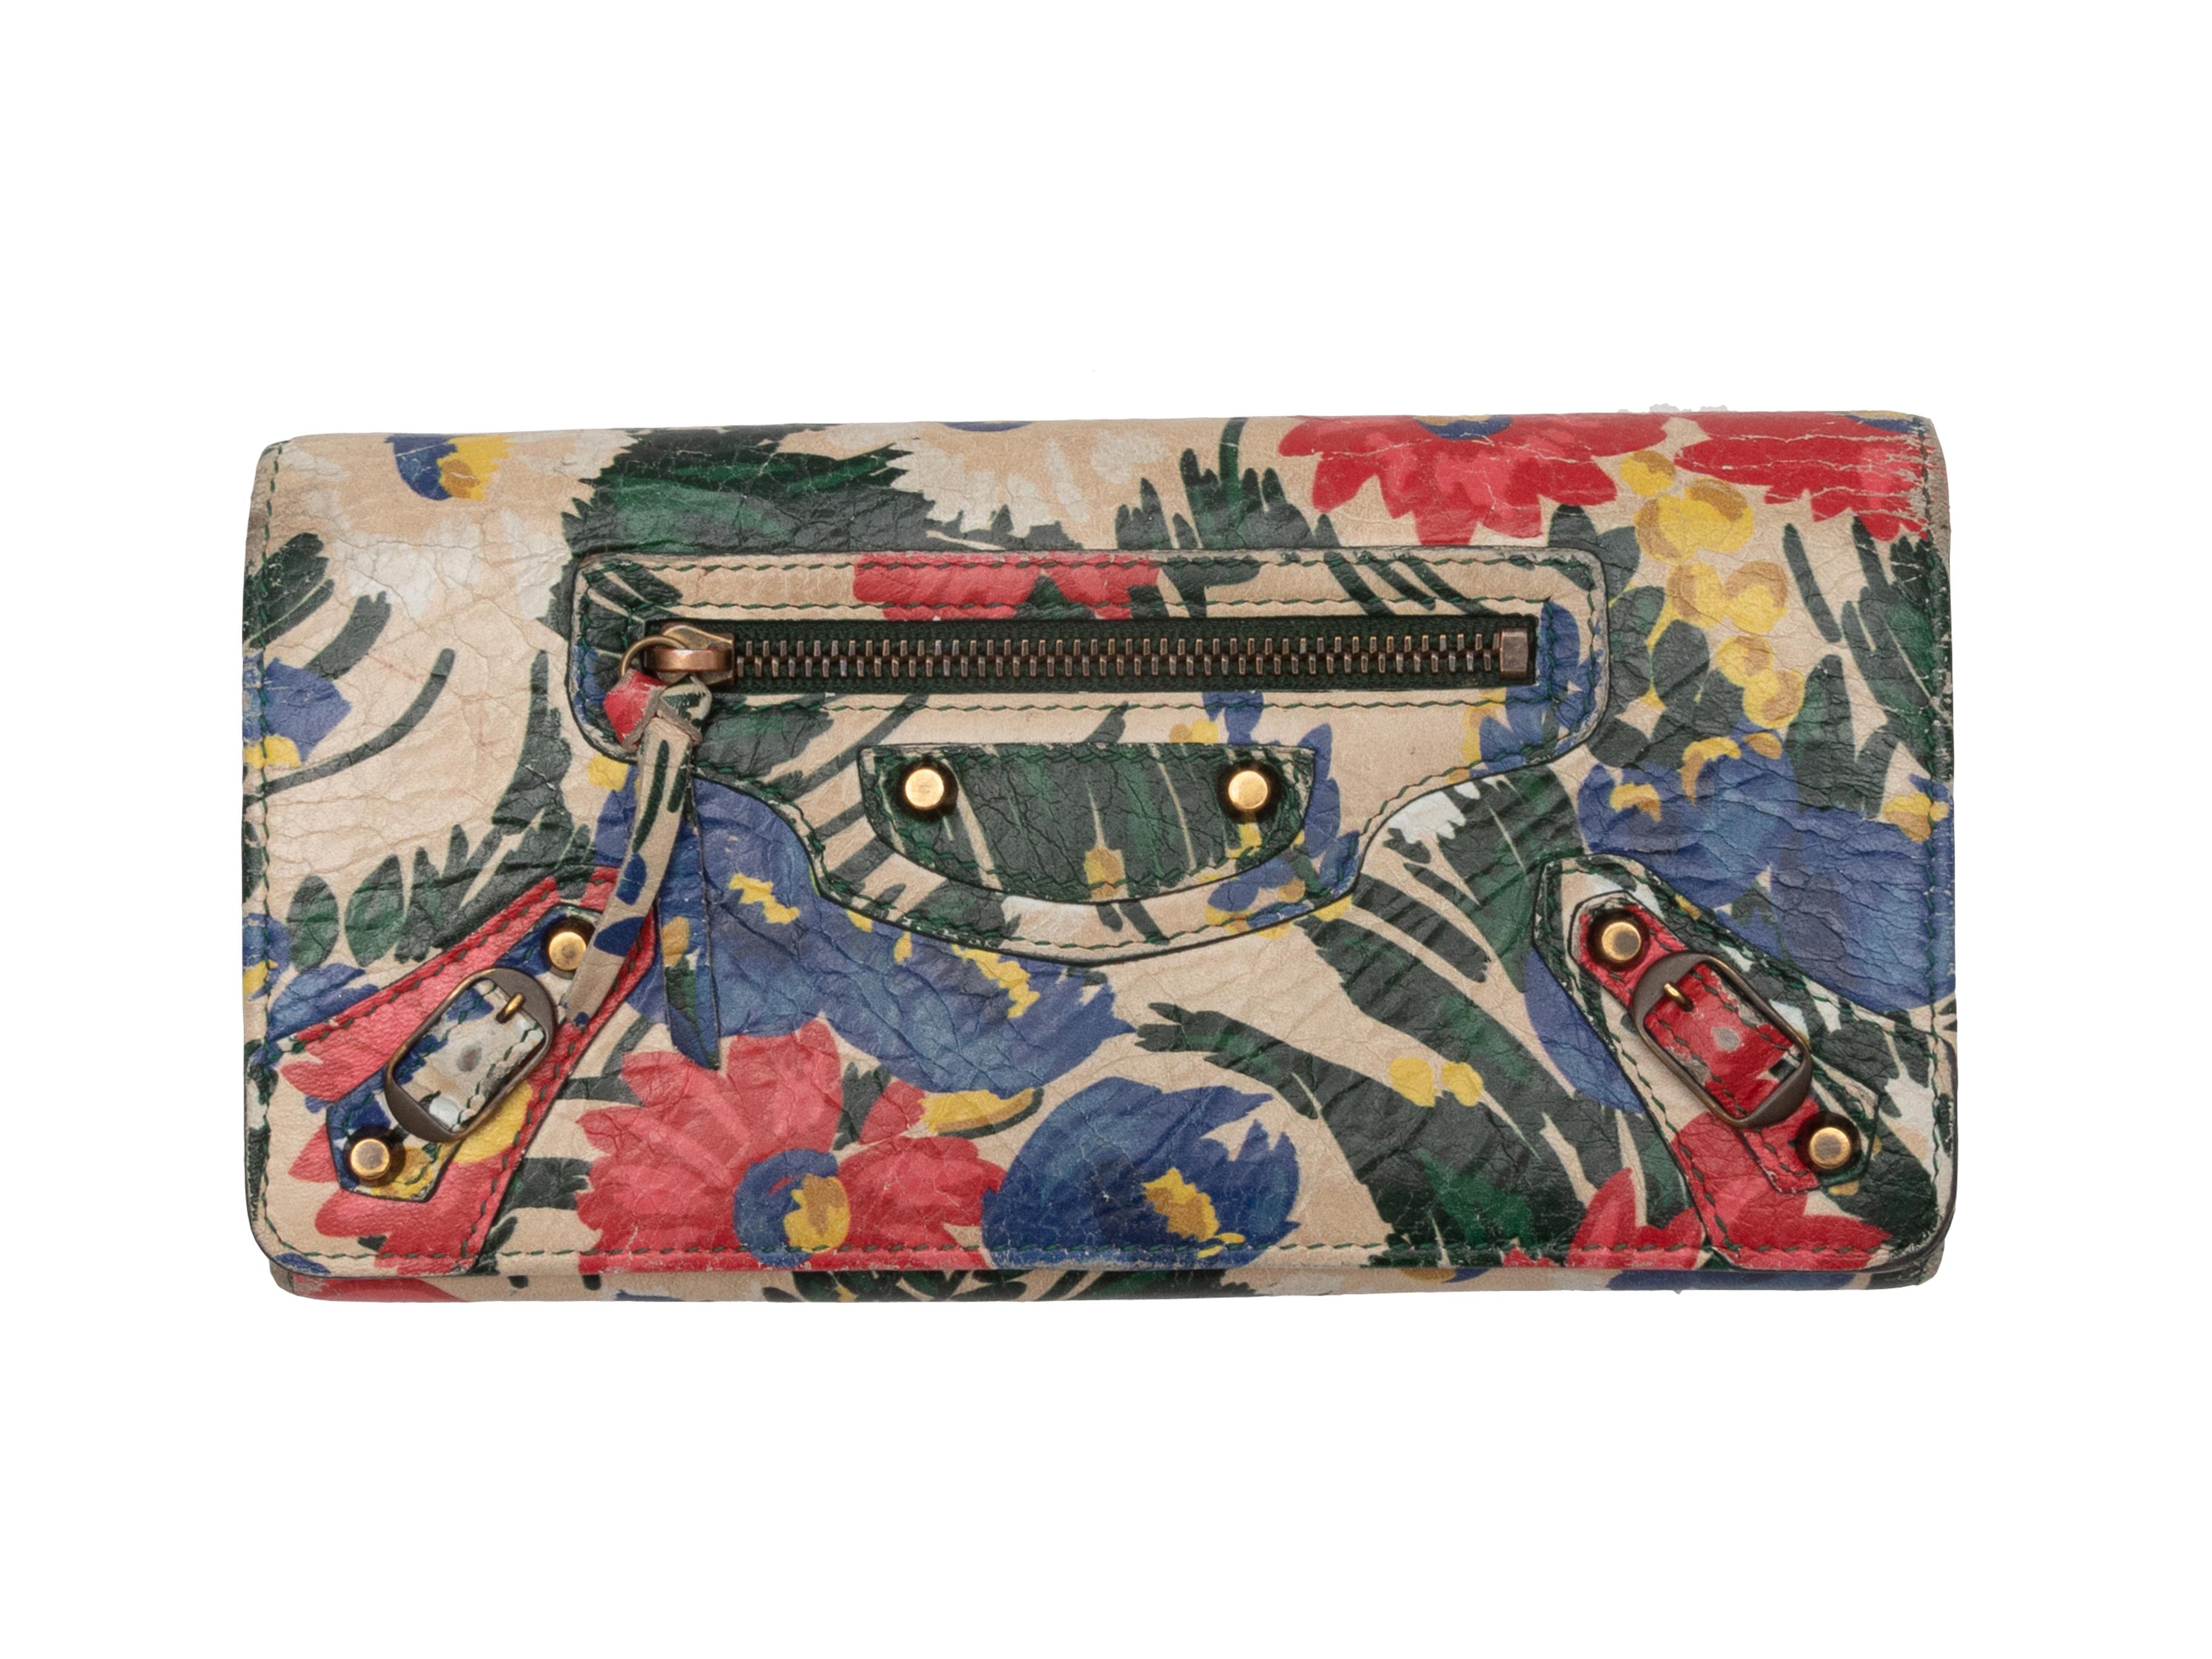 Product Details: Multicolor floral print leather moto wallet by Balenciaga. Gold-tone hardware. Multiple interior card and cash slots. Front zip closure pocket. Front flap closure. 4